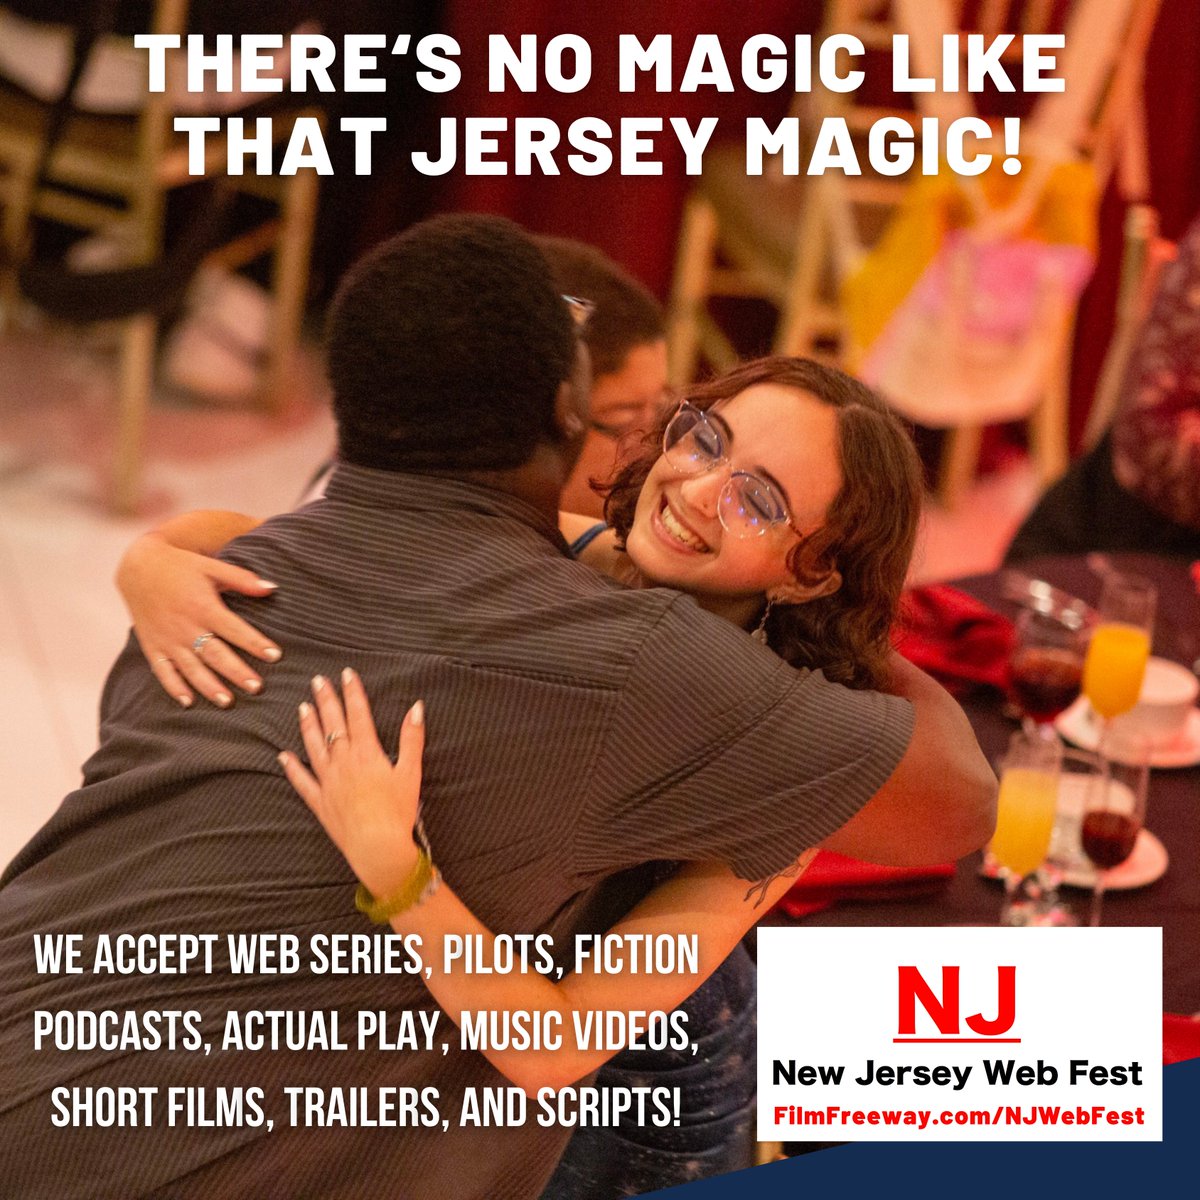 When we say #FeelTheMagic, we mean it! (Just ask anyone who has been there!) ⭐️⭐️⭐️⭐️⭐️⭐️ Submit your #WebSeries, #Pilot, #FictionPodcast, #ActualPlay, #MusicVideo, #ShortFilm, #trailer, or #script! ⭐️⭐️⭐️⭐️⭐️⭐️ FilmFreeway.com/NJWebFest #FilmFestival #WebFest #NewJersey